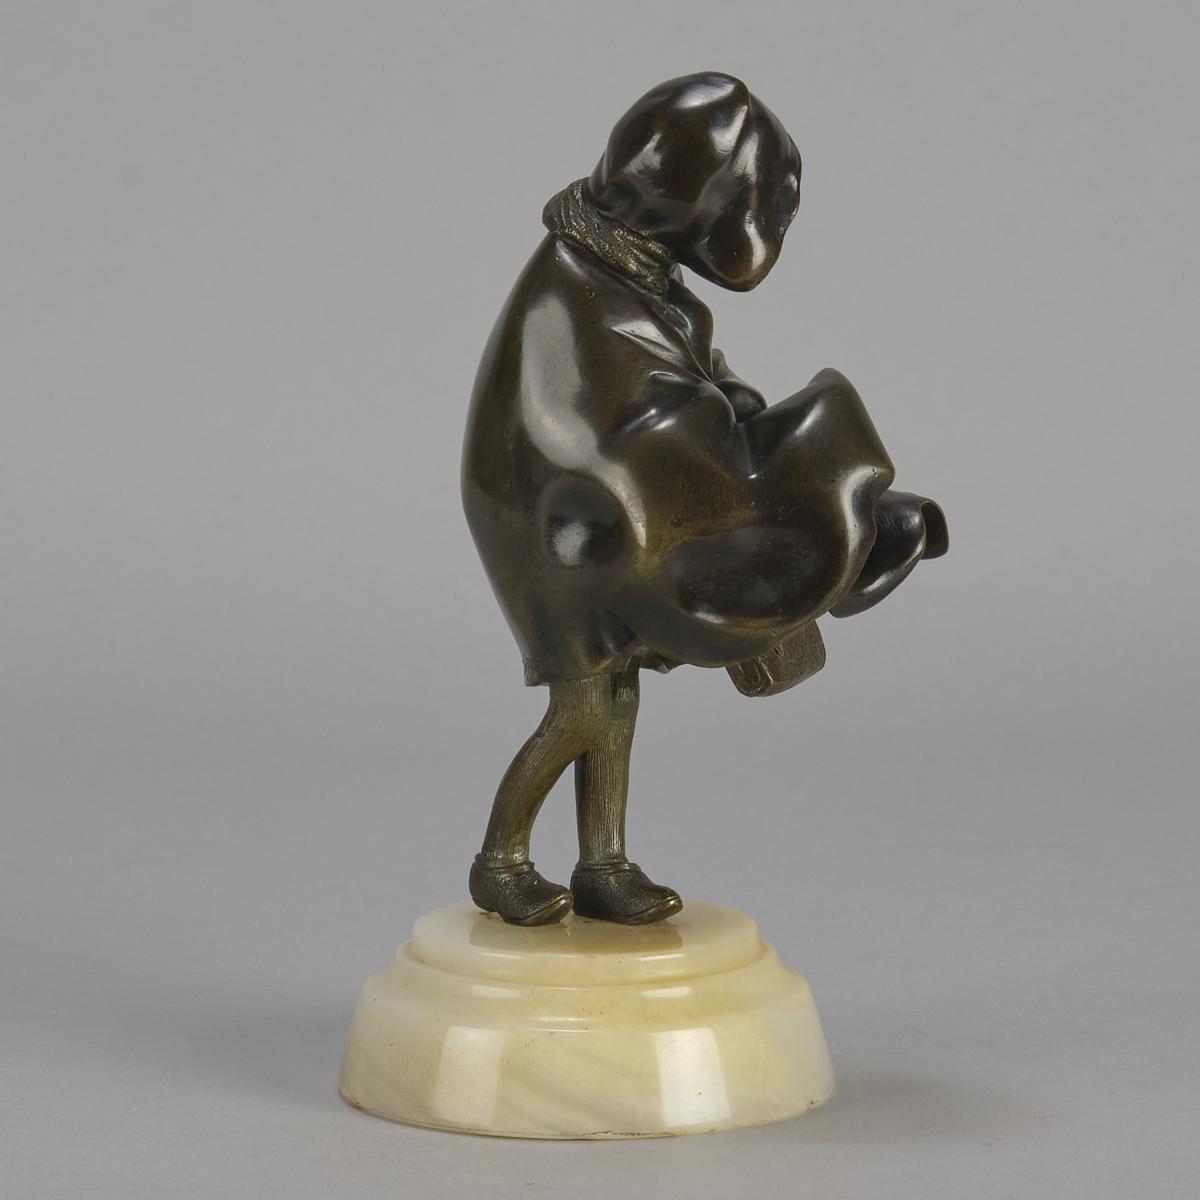 Early 20th Century Art Deco Bronze Sculpture entitled "Windy Day" by Demetre Chiparus